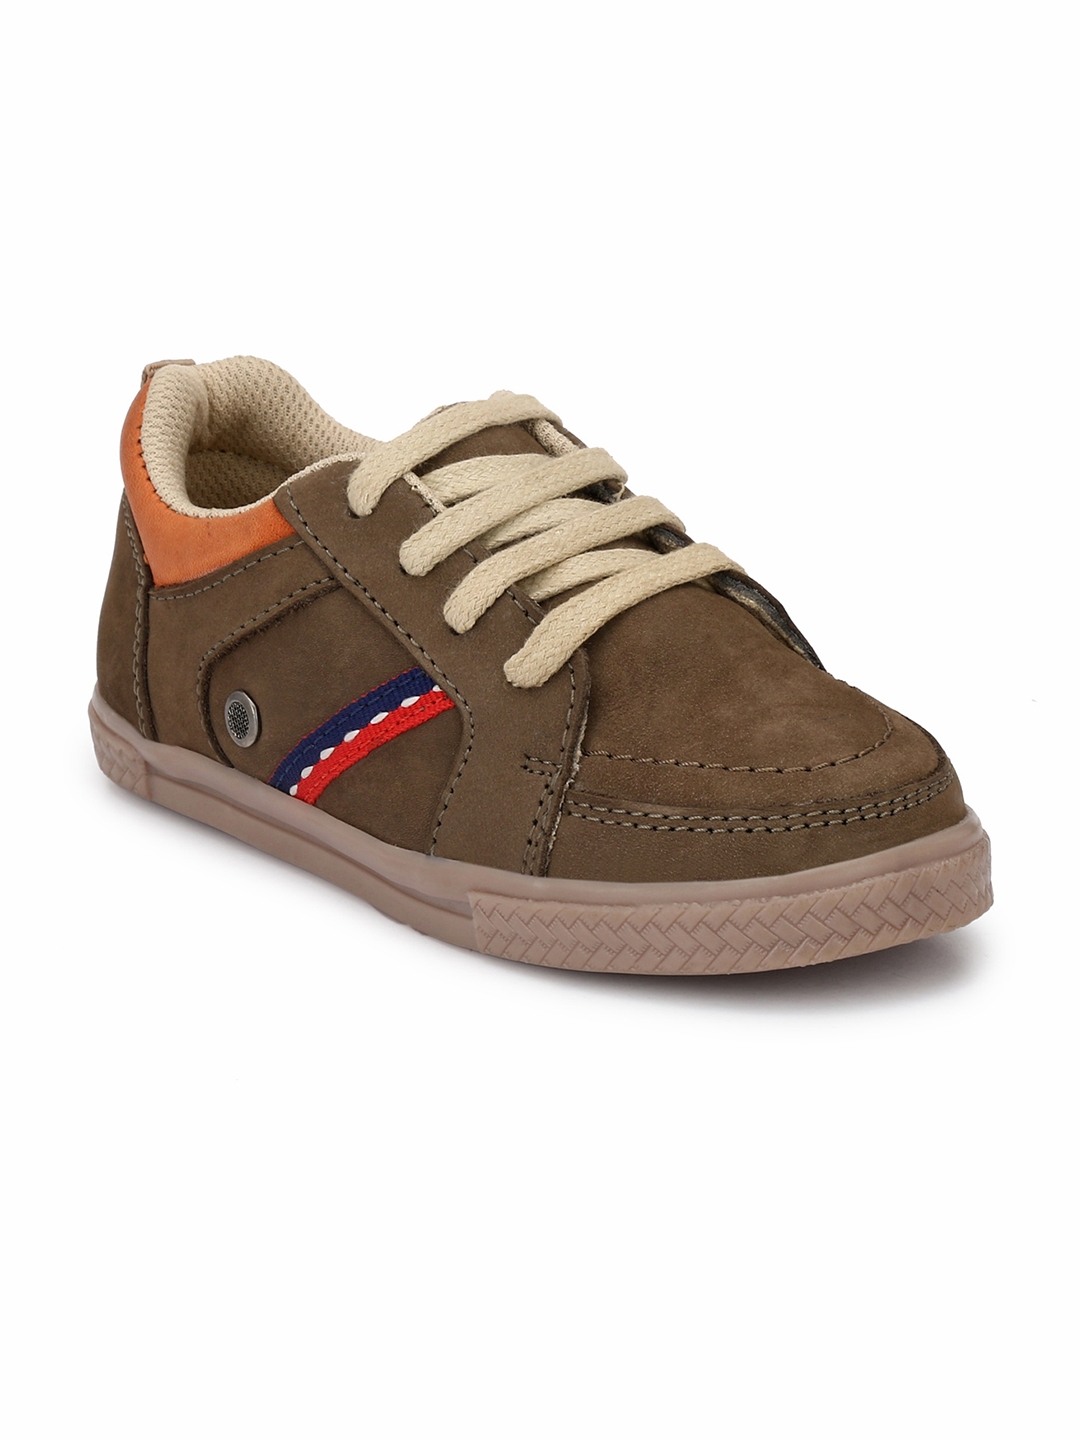 Buy TUSKEY Boys Brown Sneakers - Casual Shoes for Boys 4448271 | Myntra